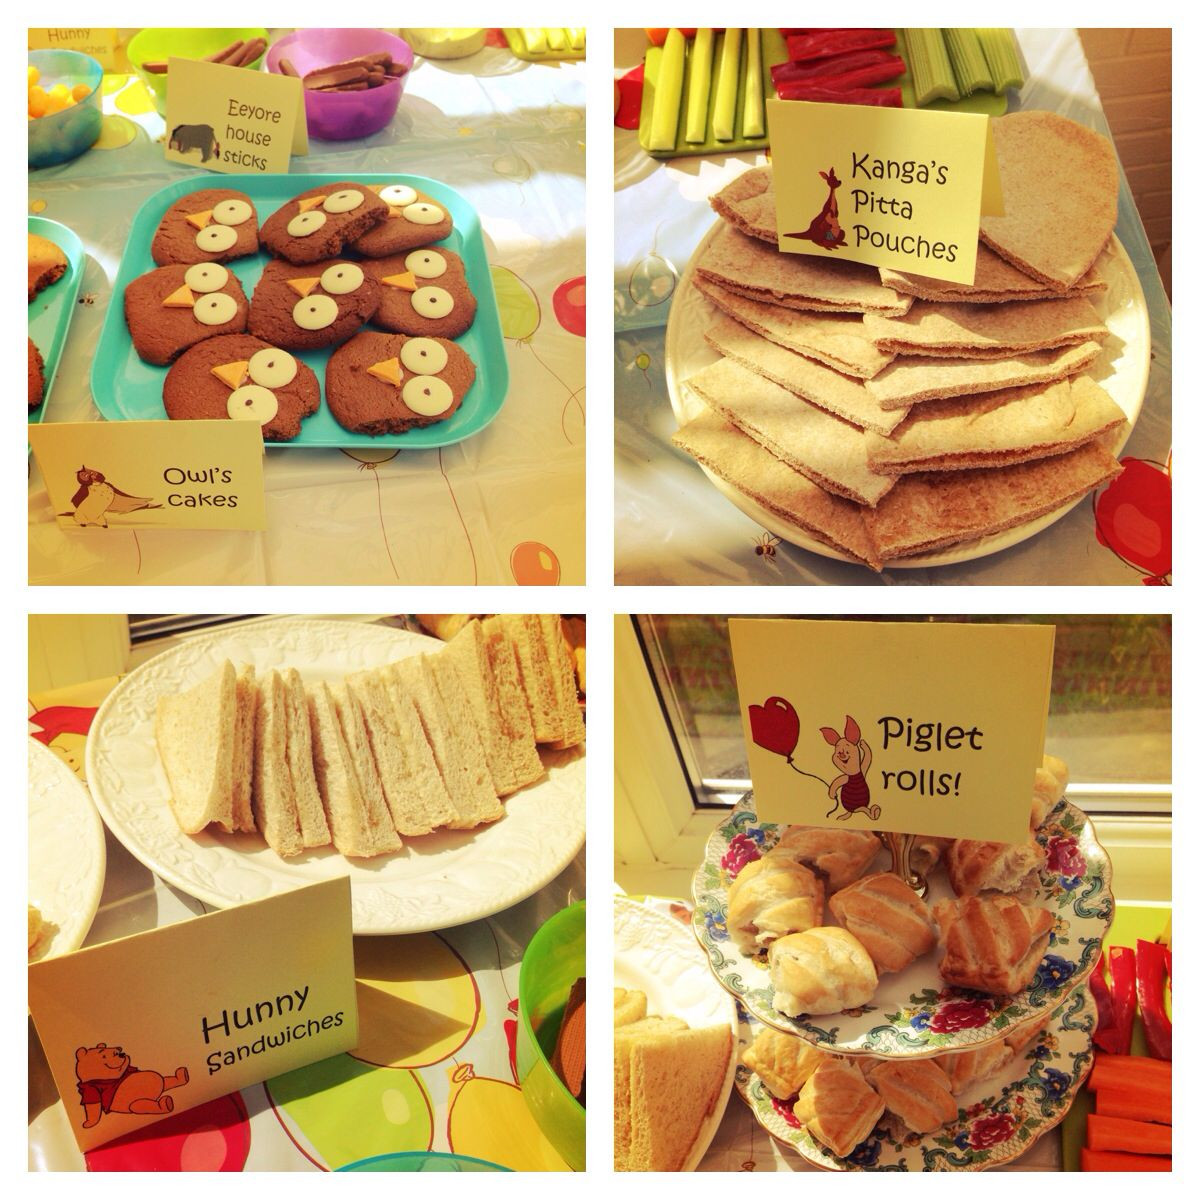 Winnie The Pooh Party Food Ideas
 Winnie the Pooh party food